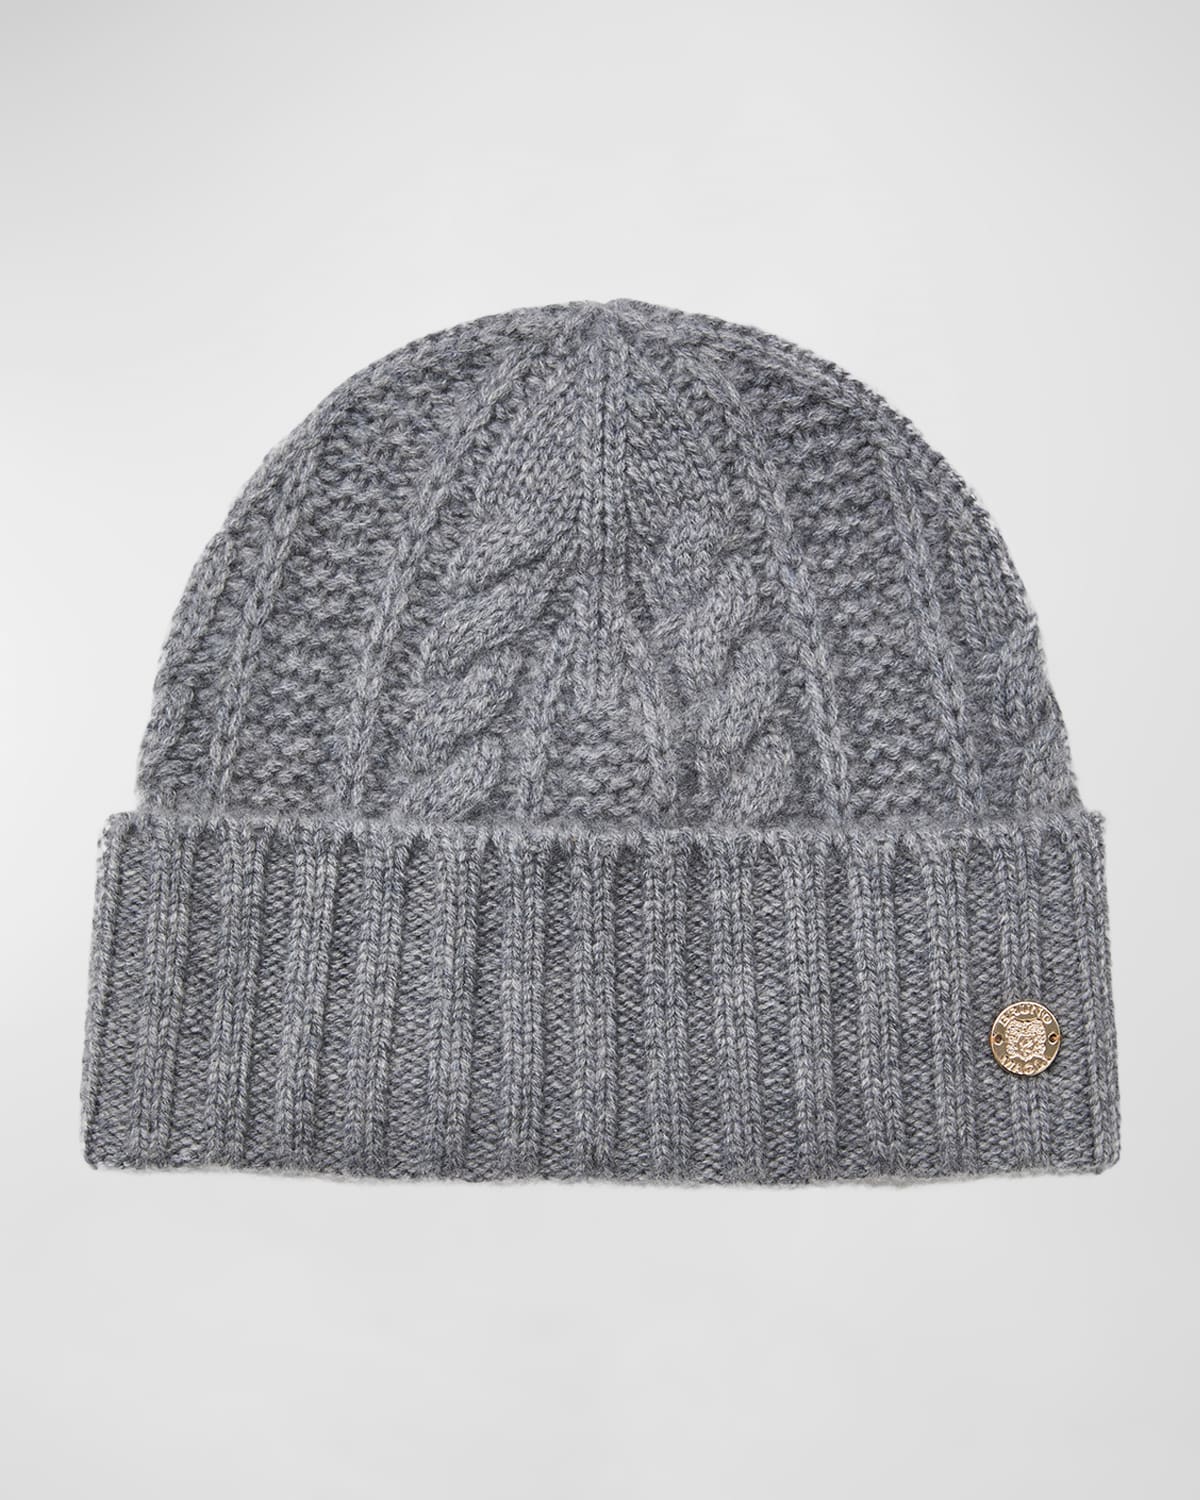 Cable Knit Cuffed Cashmere Beanie